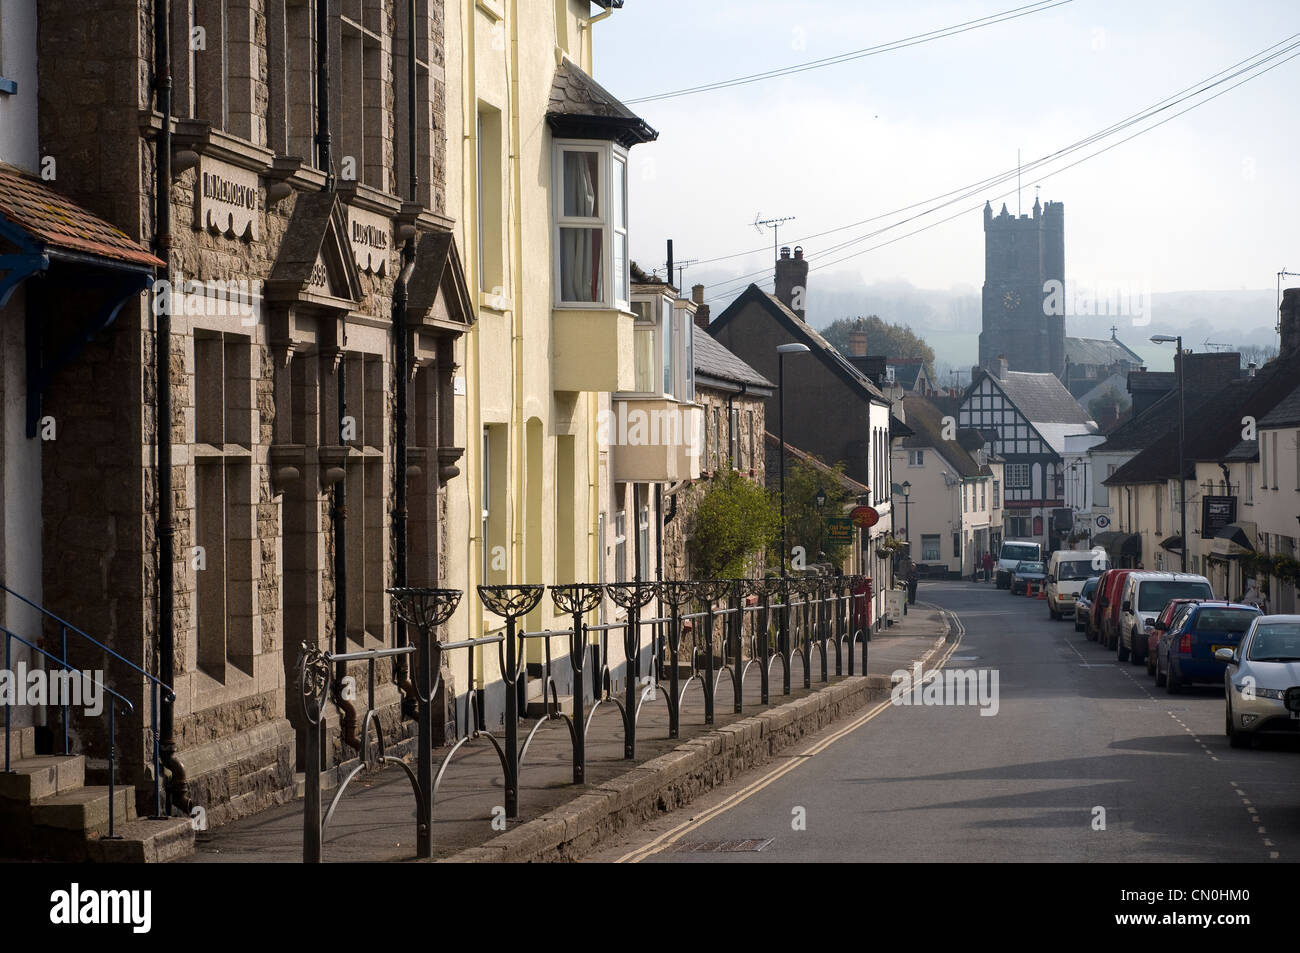 Moretonhampstead - ‘The Gateway to the Moor’, is an ancient market town located in the centre of Devon on the edge of Dartmoor. Stock Photo